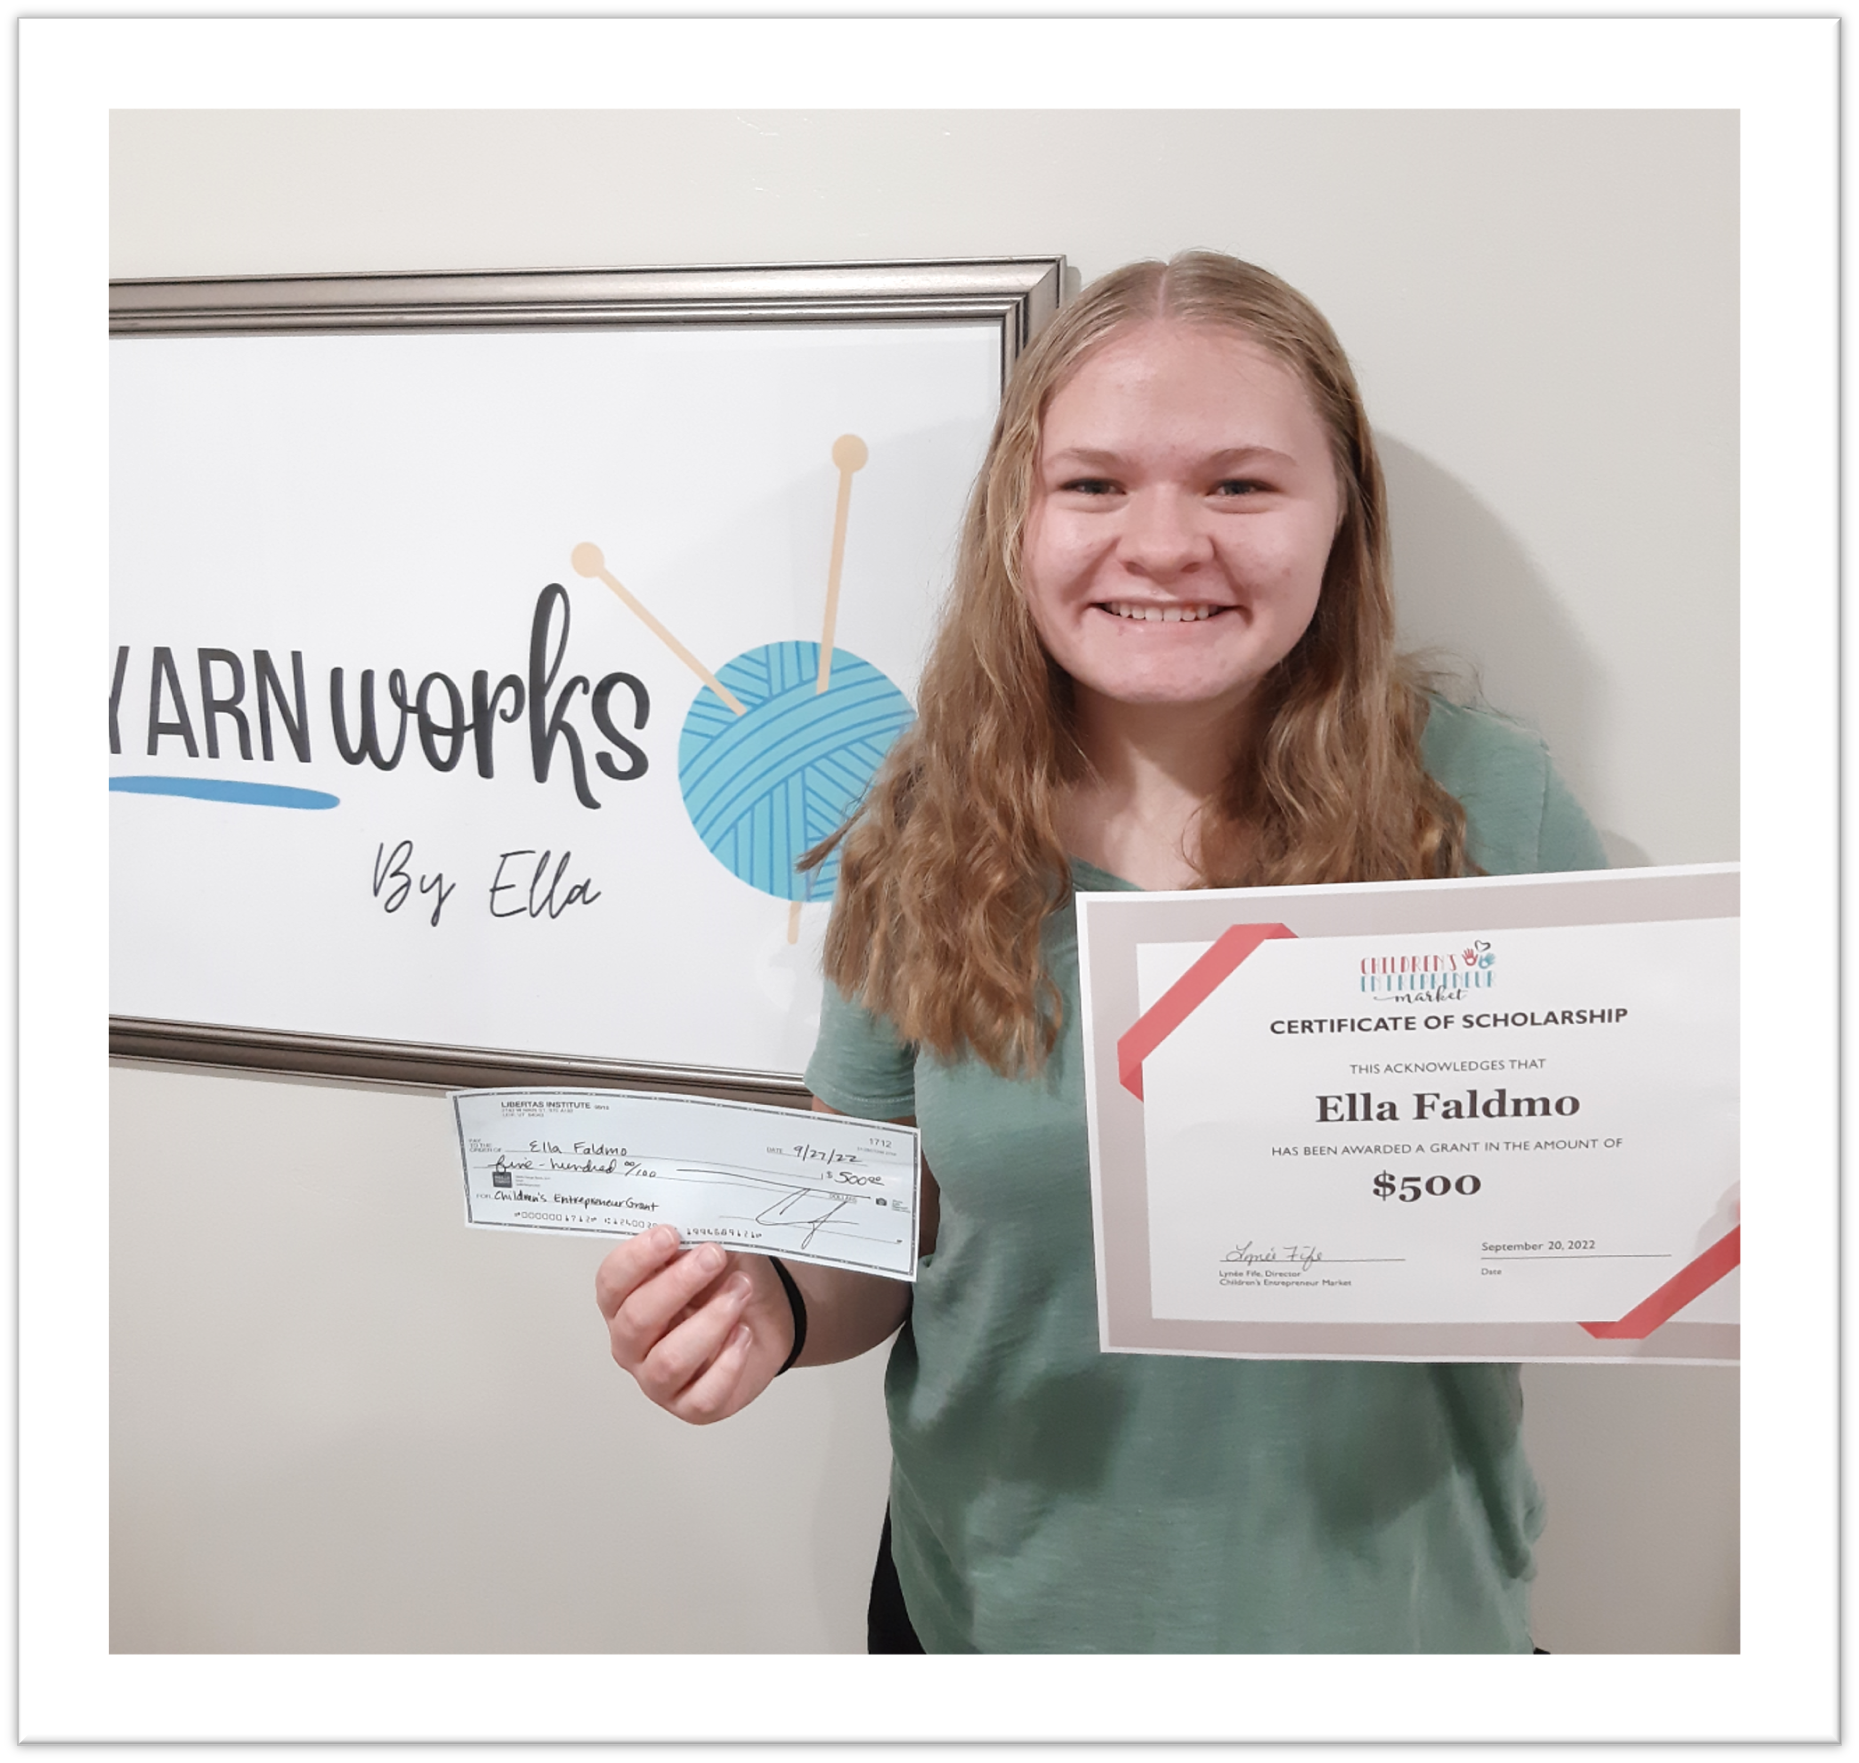 Congratulations to Ella on being awarded a $500 Scholarship to invest in her business, Yarnworks!